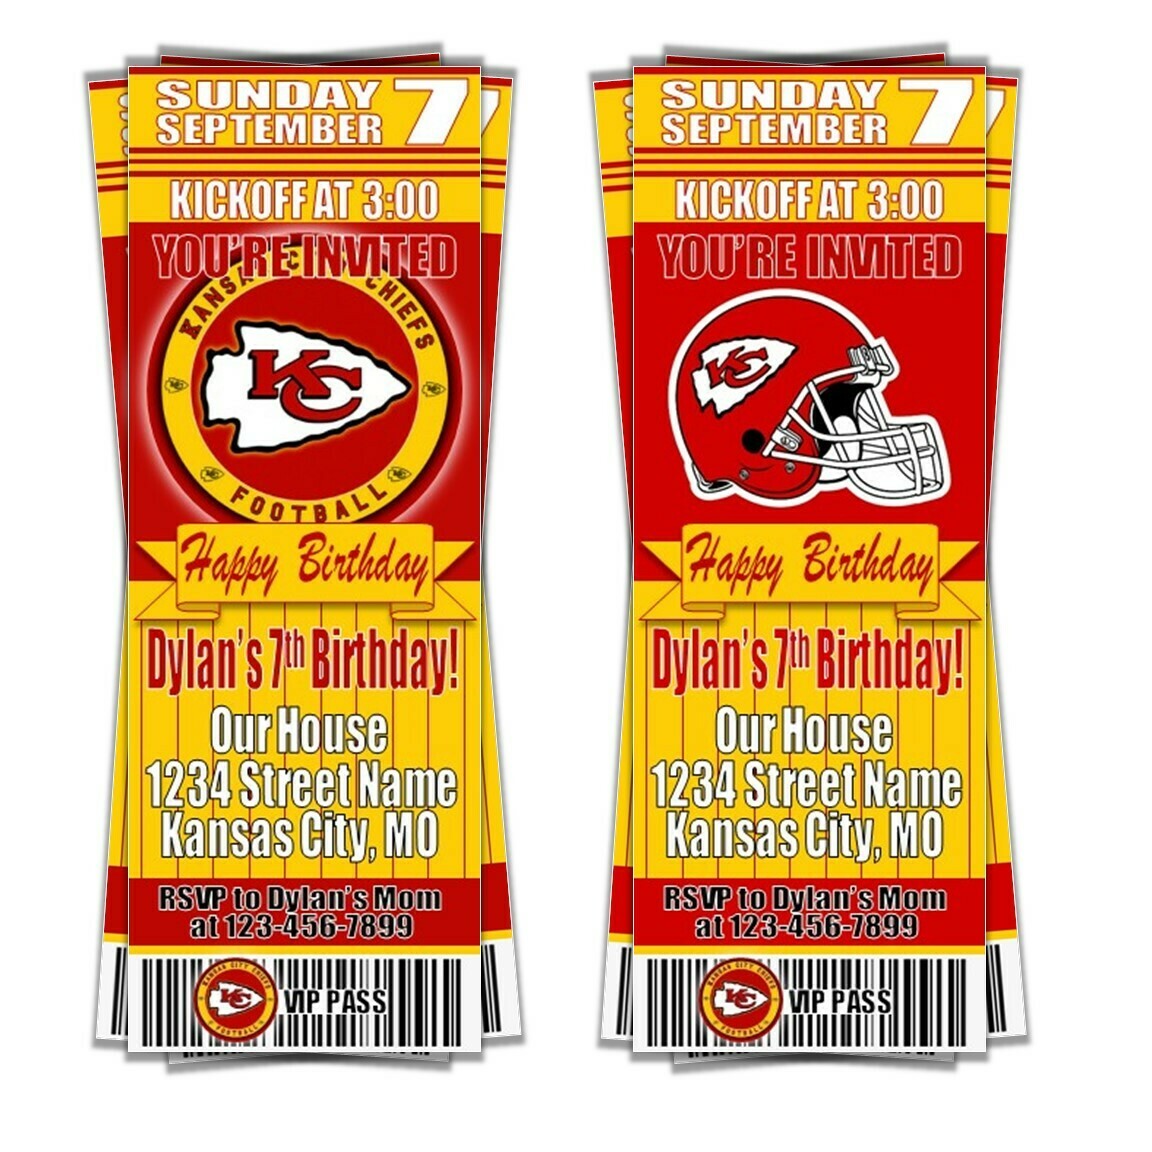 kc chief tickets